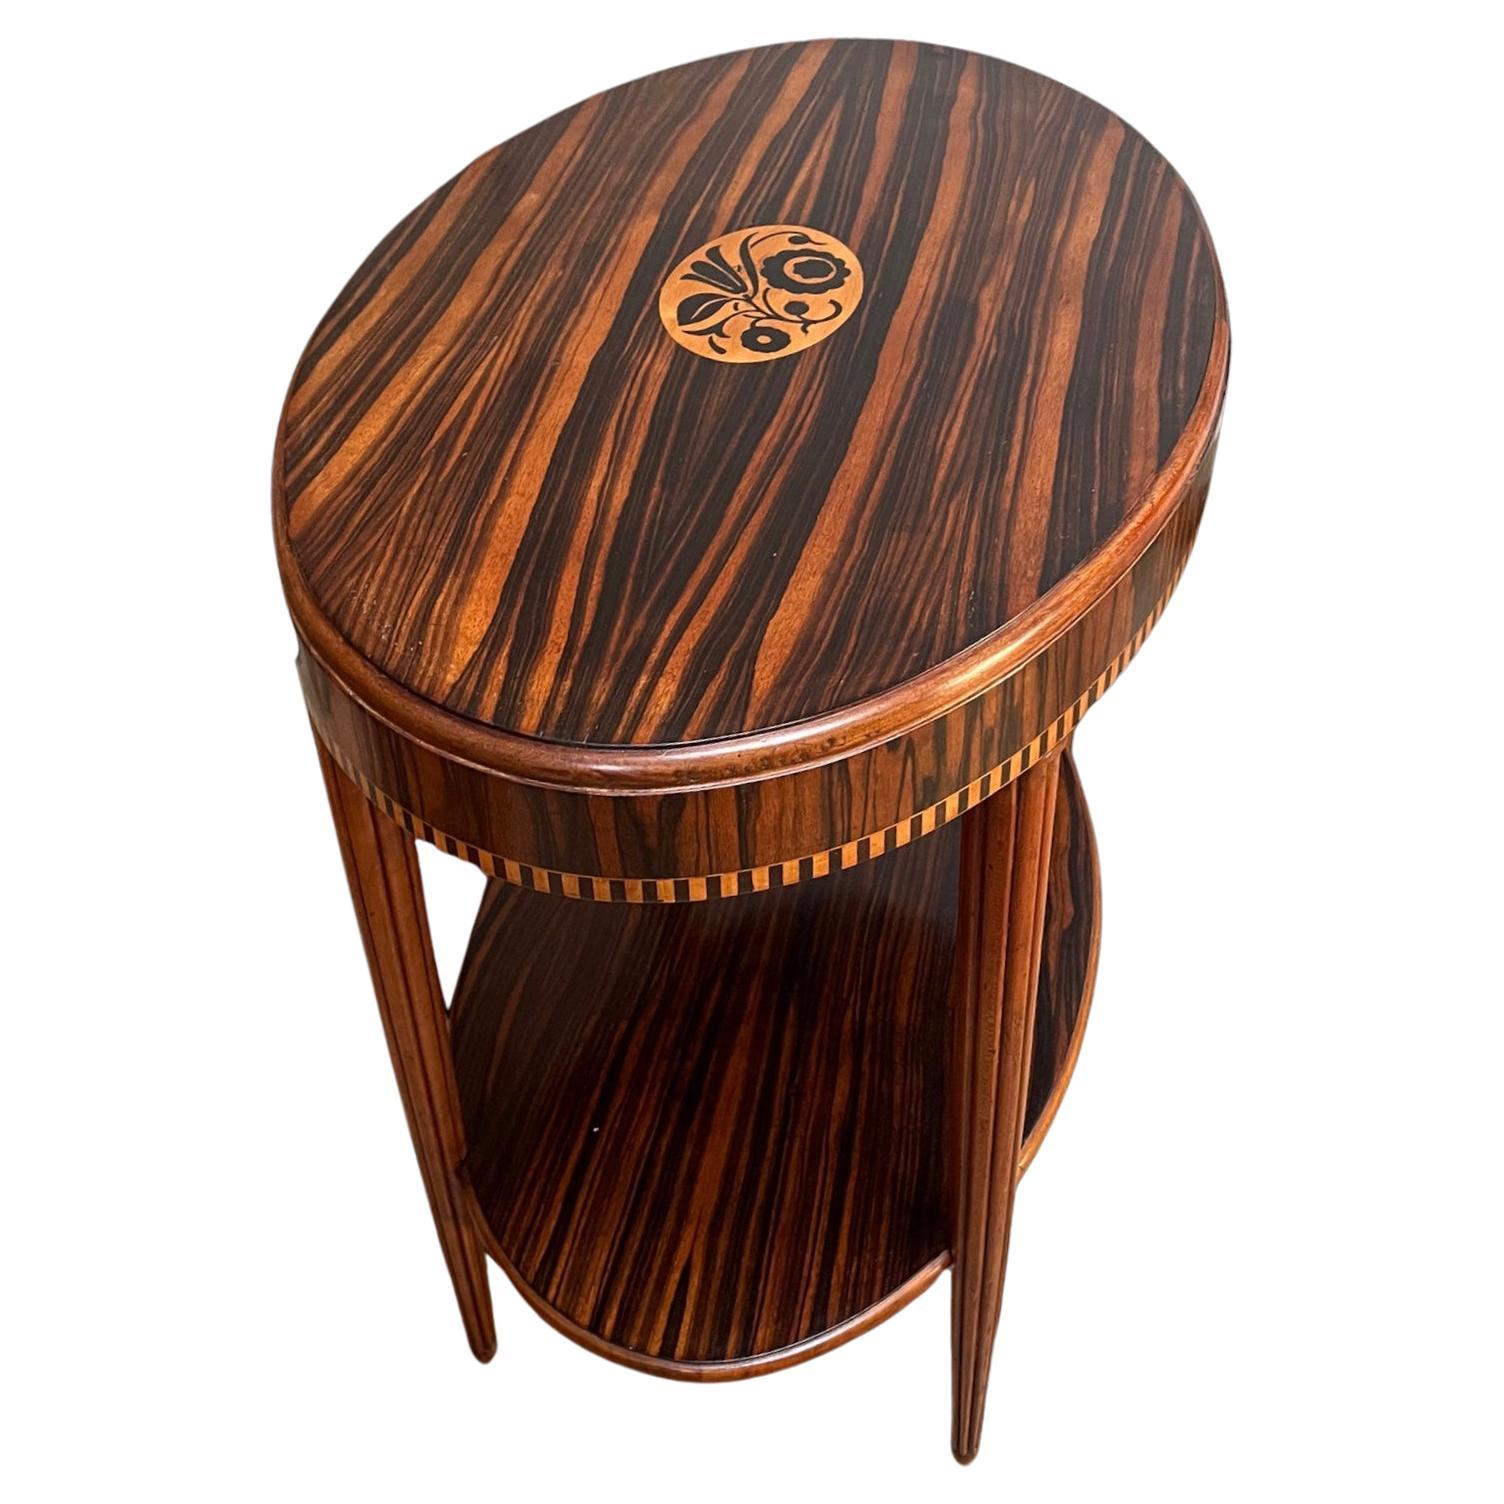 A quality French Art Deco side table in macassar ebony and walnut. Oval, with the top inlaid with a central floral motif and a shelf below. Raised on four elegantly turned and tapered reeded legs
All our furniture is professionally polished and